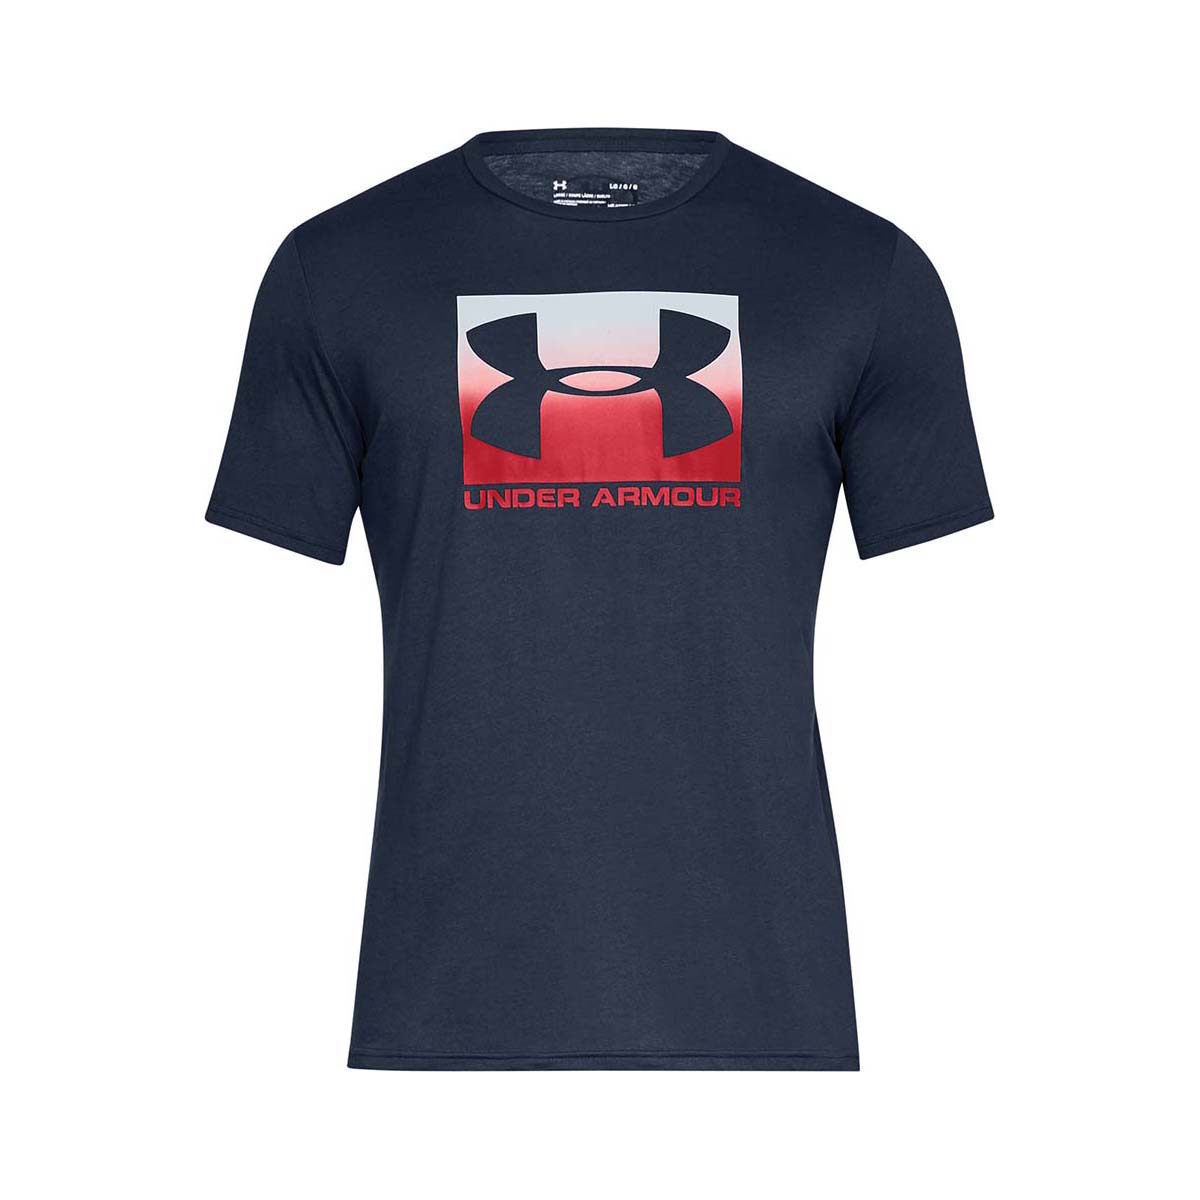 Under Armour Men's Boxed Sportstyle Short Sleeve Tee Academy/Red XL